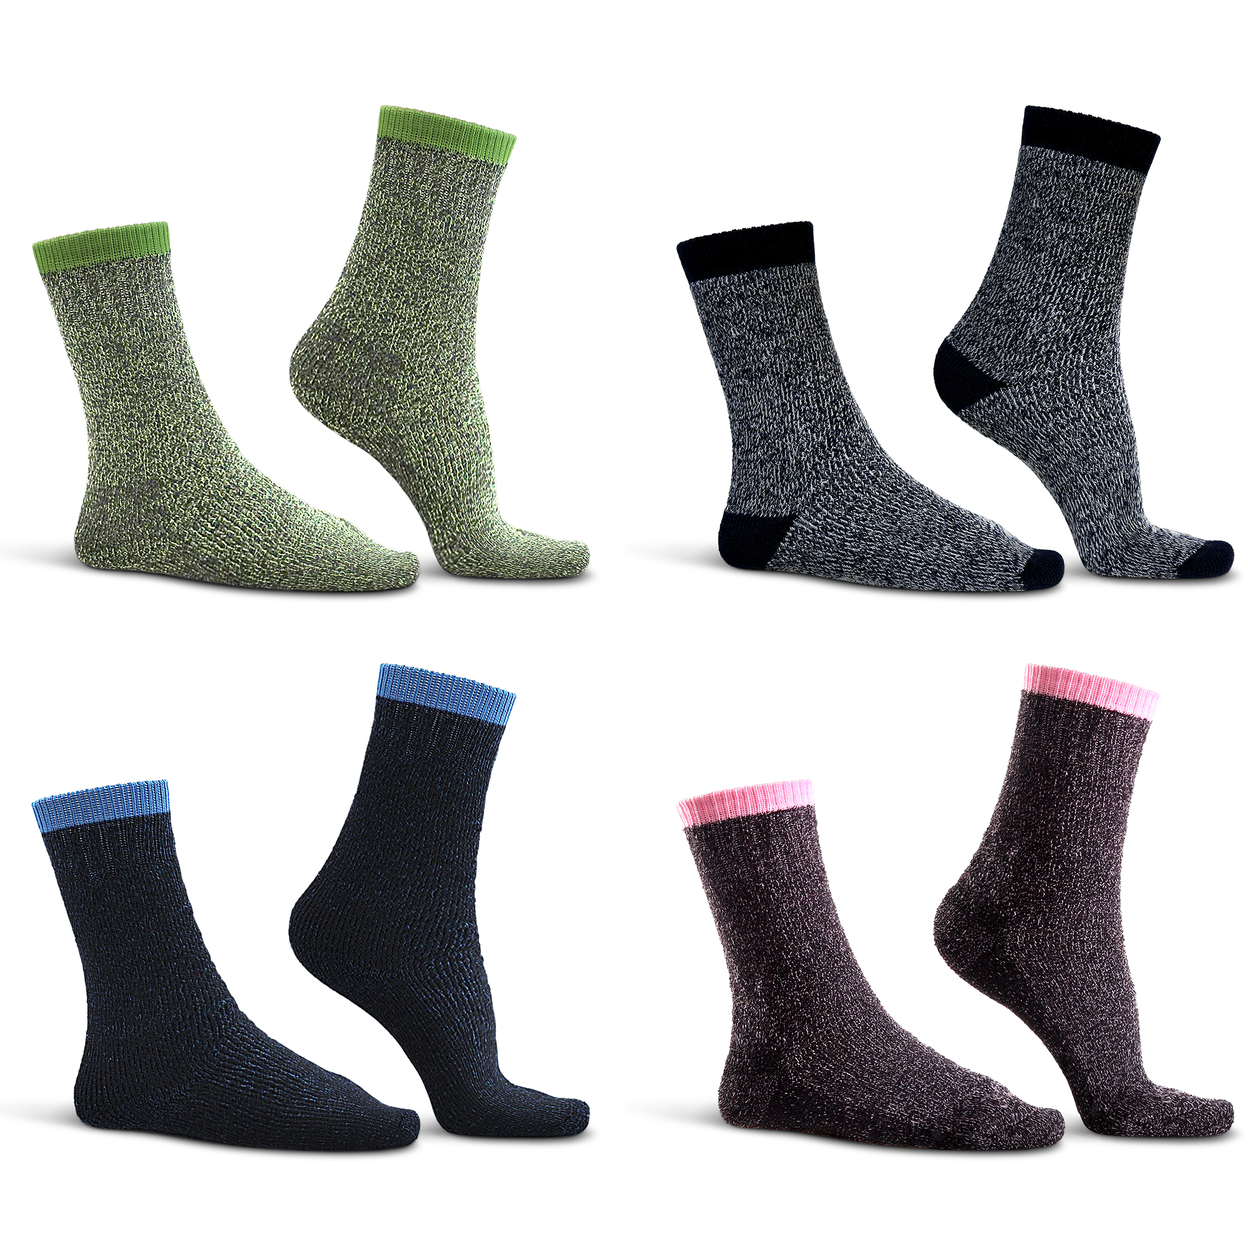 4-Pairs: Women's Cozy Soft Thick Winter Warm Thermal Insulated Heated Crew Socks